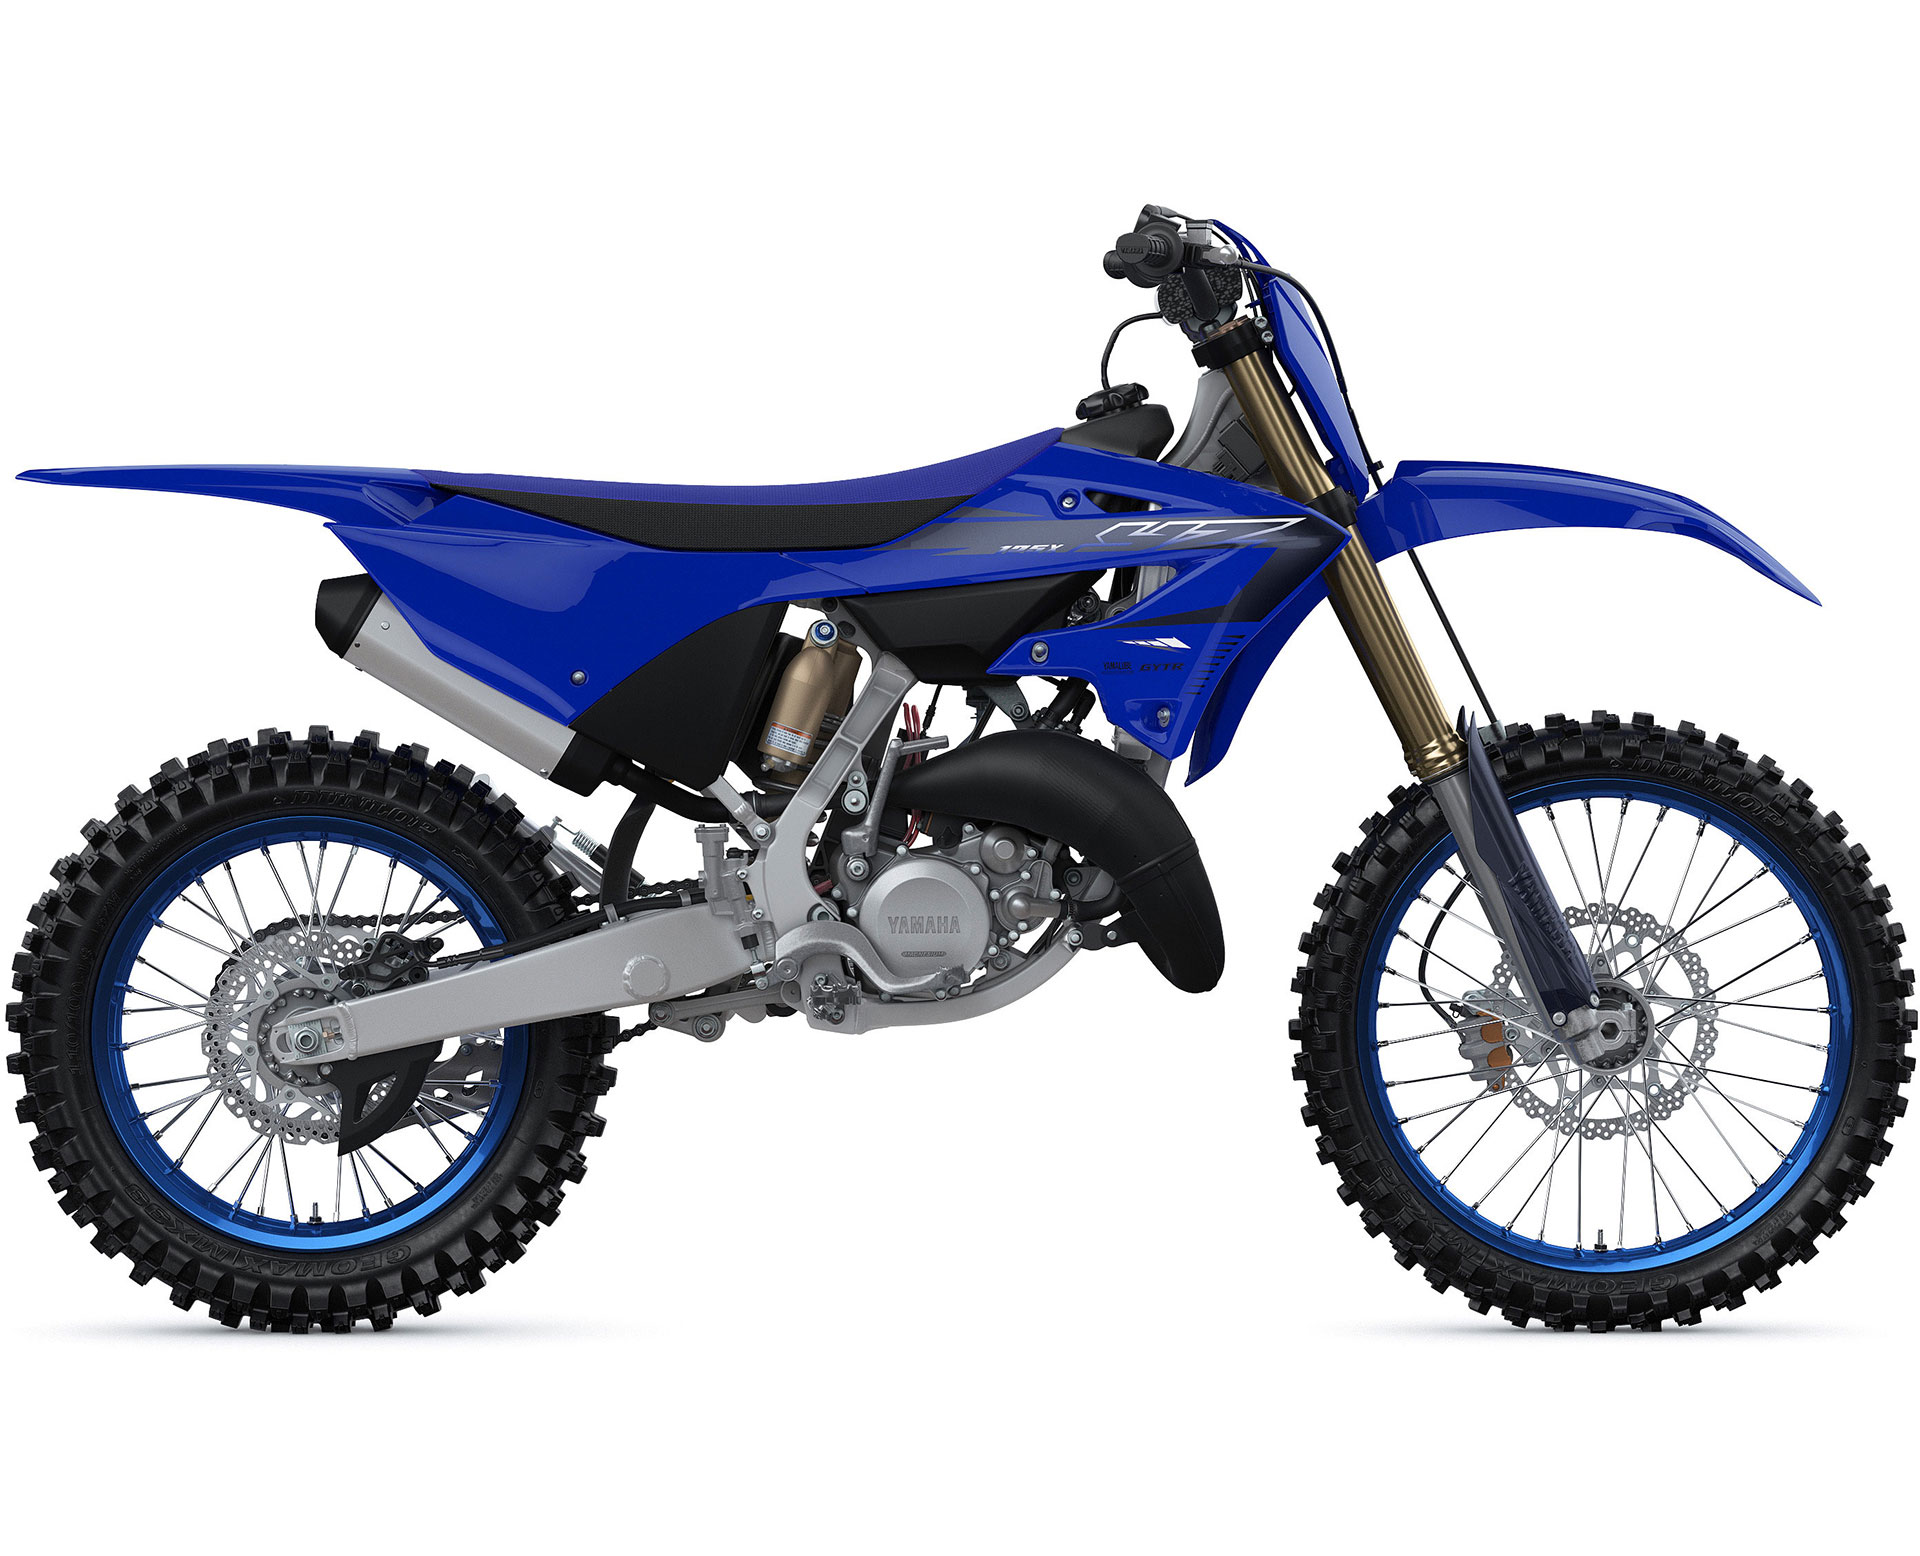 Thumbnail of your customized YZ125X 2023